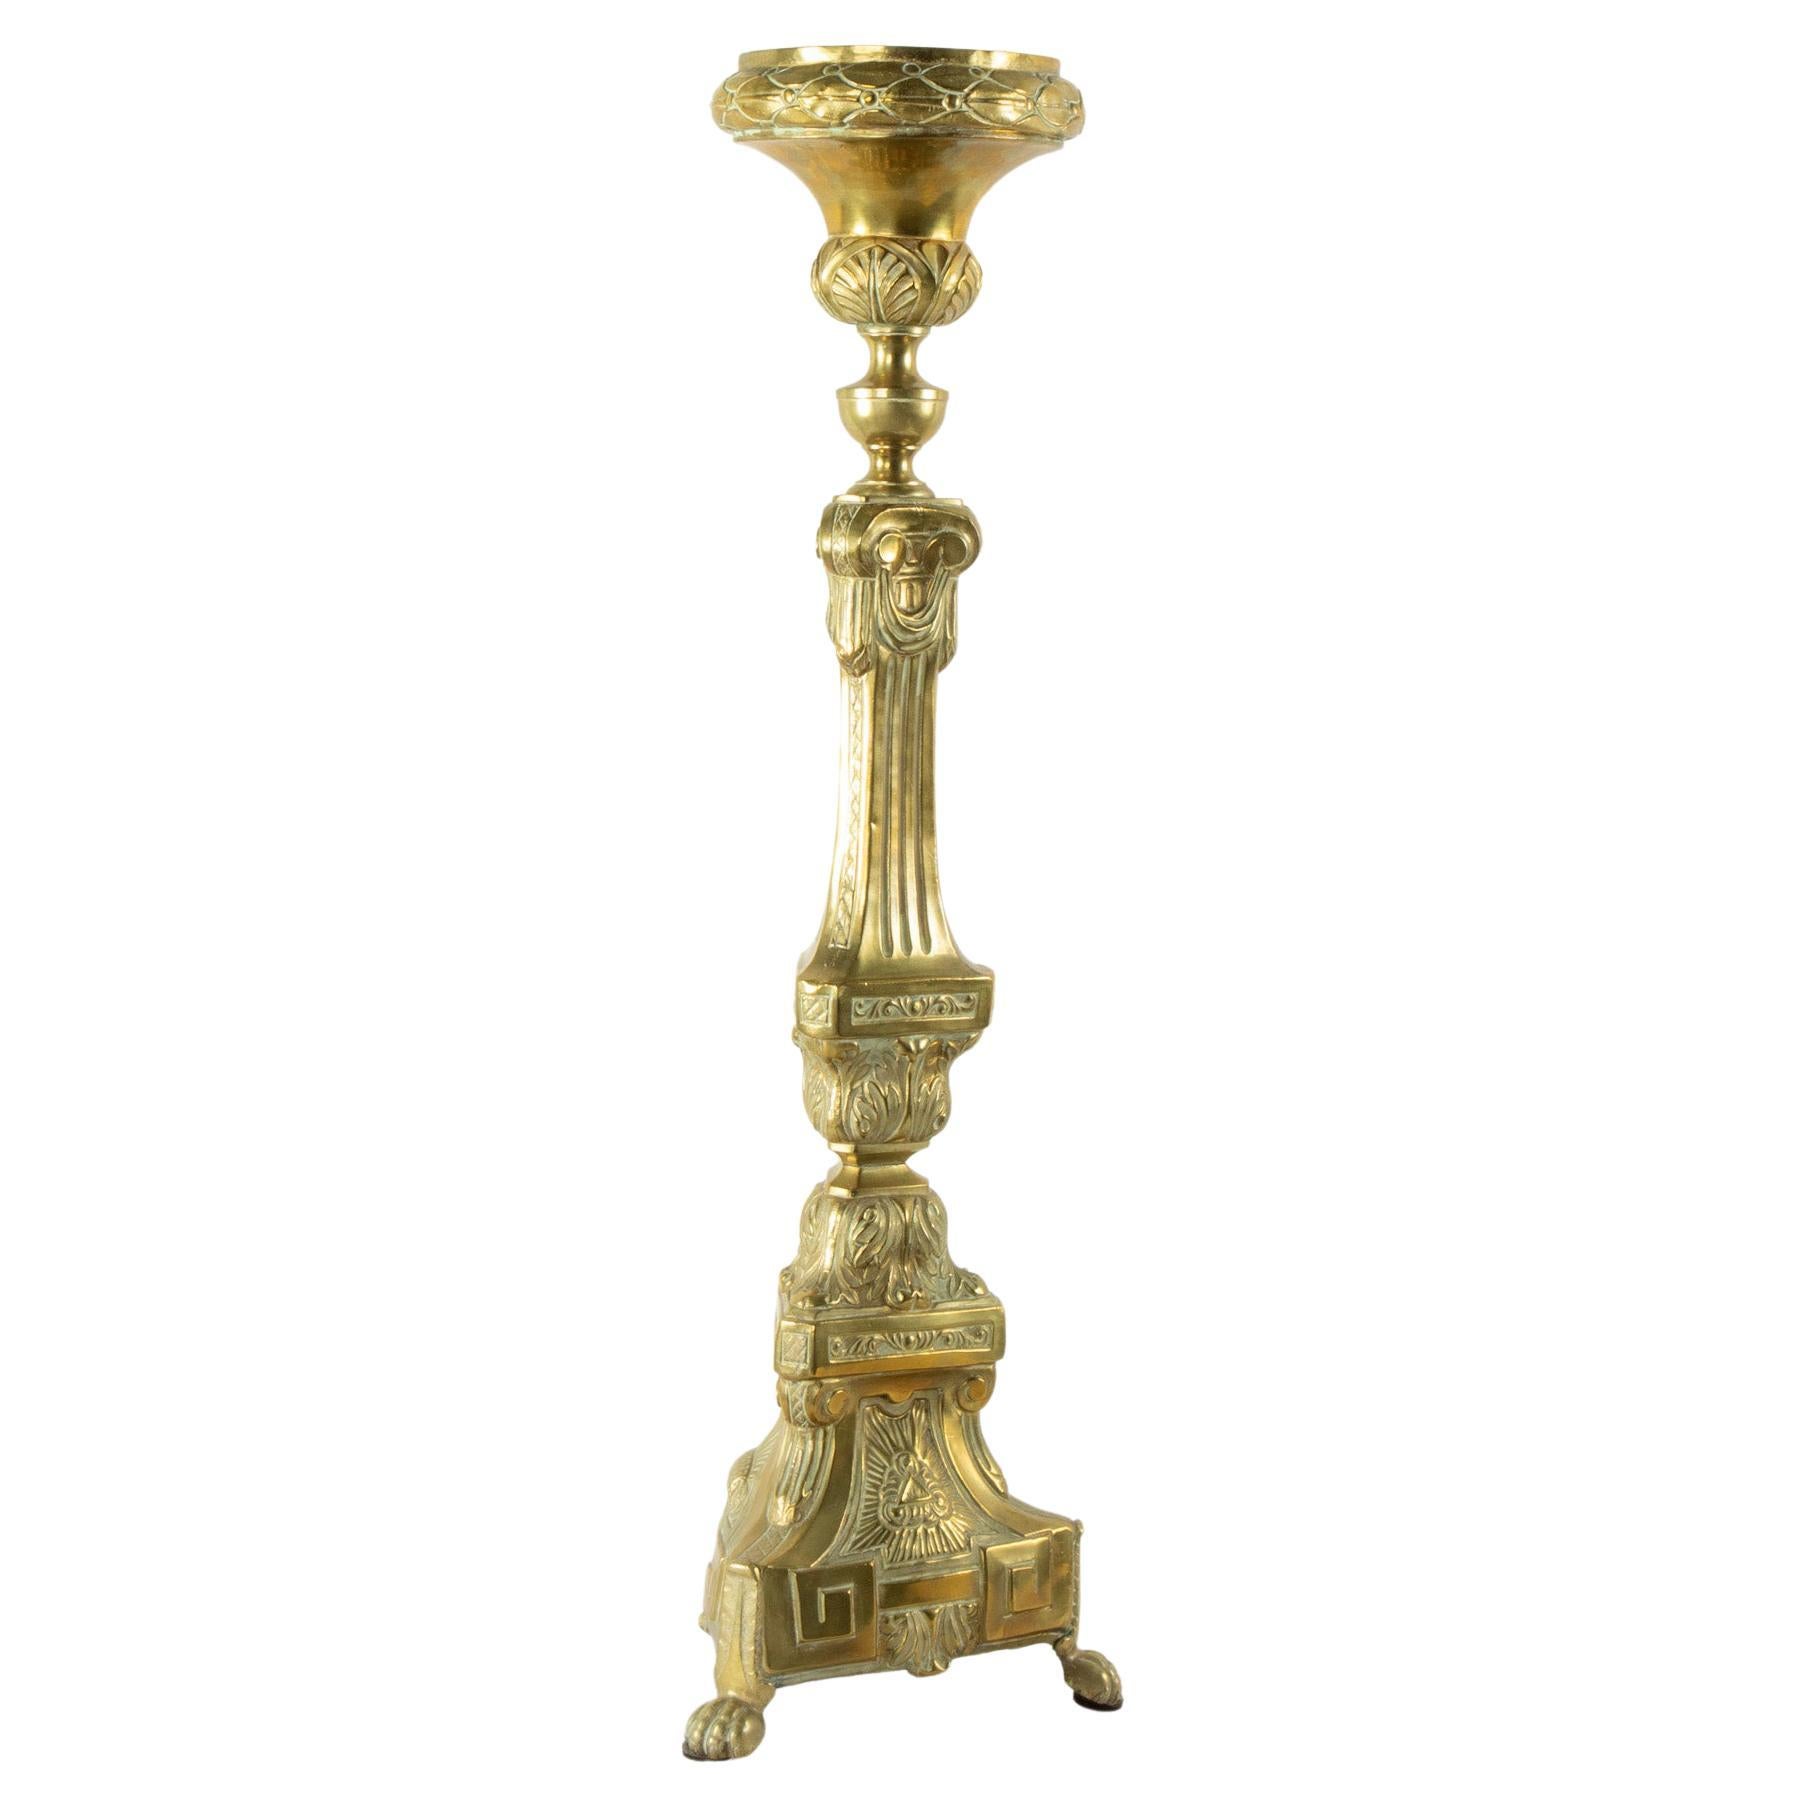 Originally used in a French chapel, this exquisite brass repousse pricket or candlestick from the late nineteenth century stands at over two and a half feet tall and features intricate detailing of acanthus leaves and laurels, as well as geometric